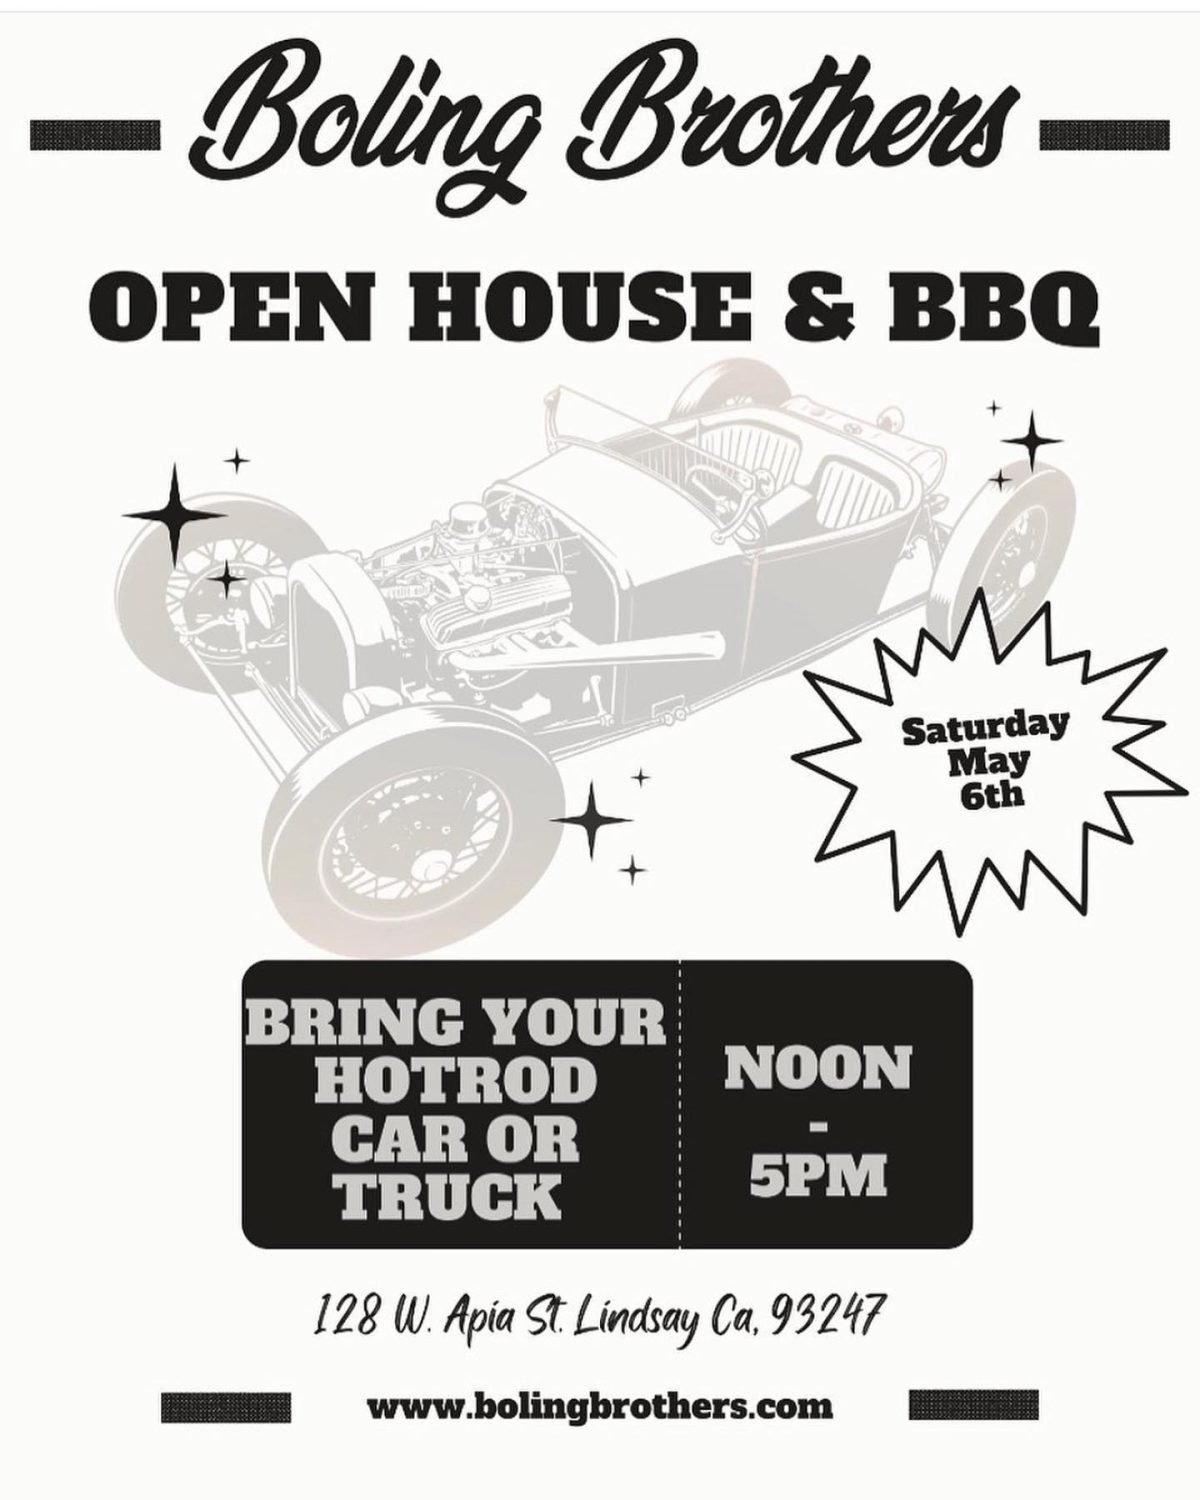 Boling Brothers Open House & BBQ